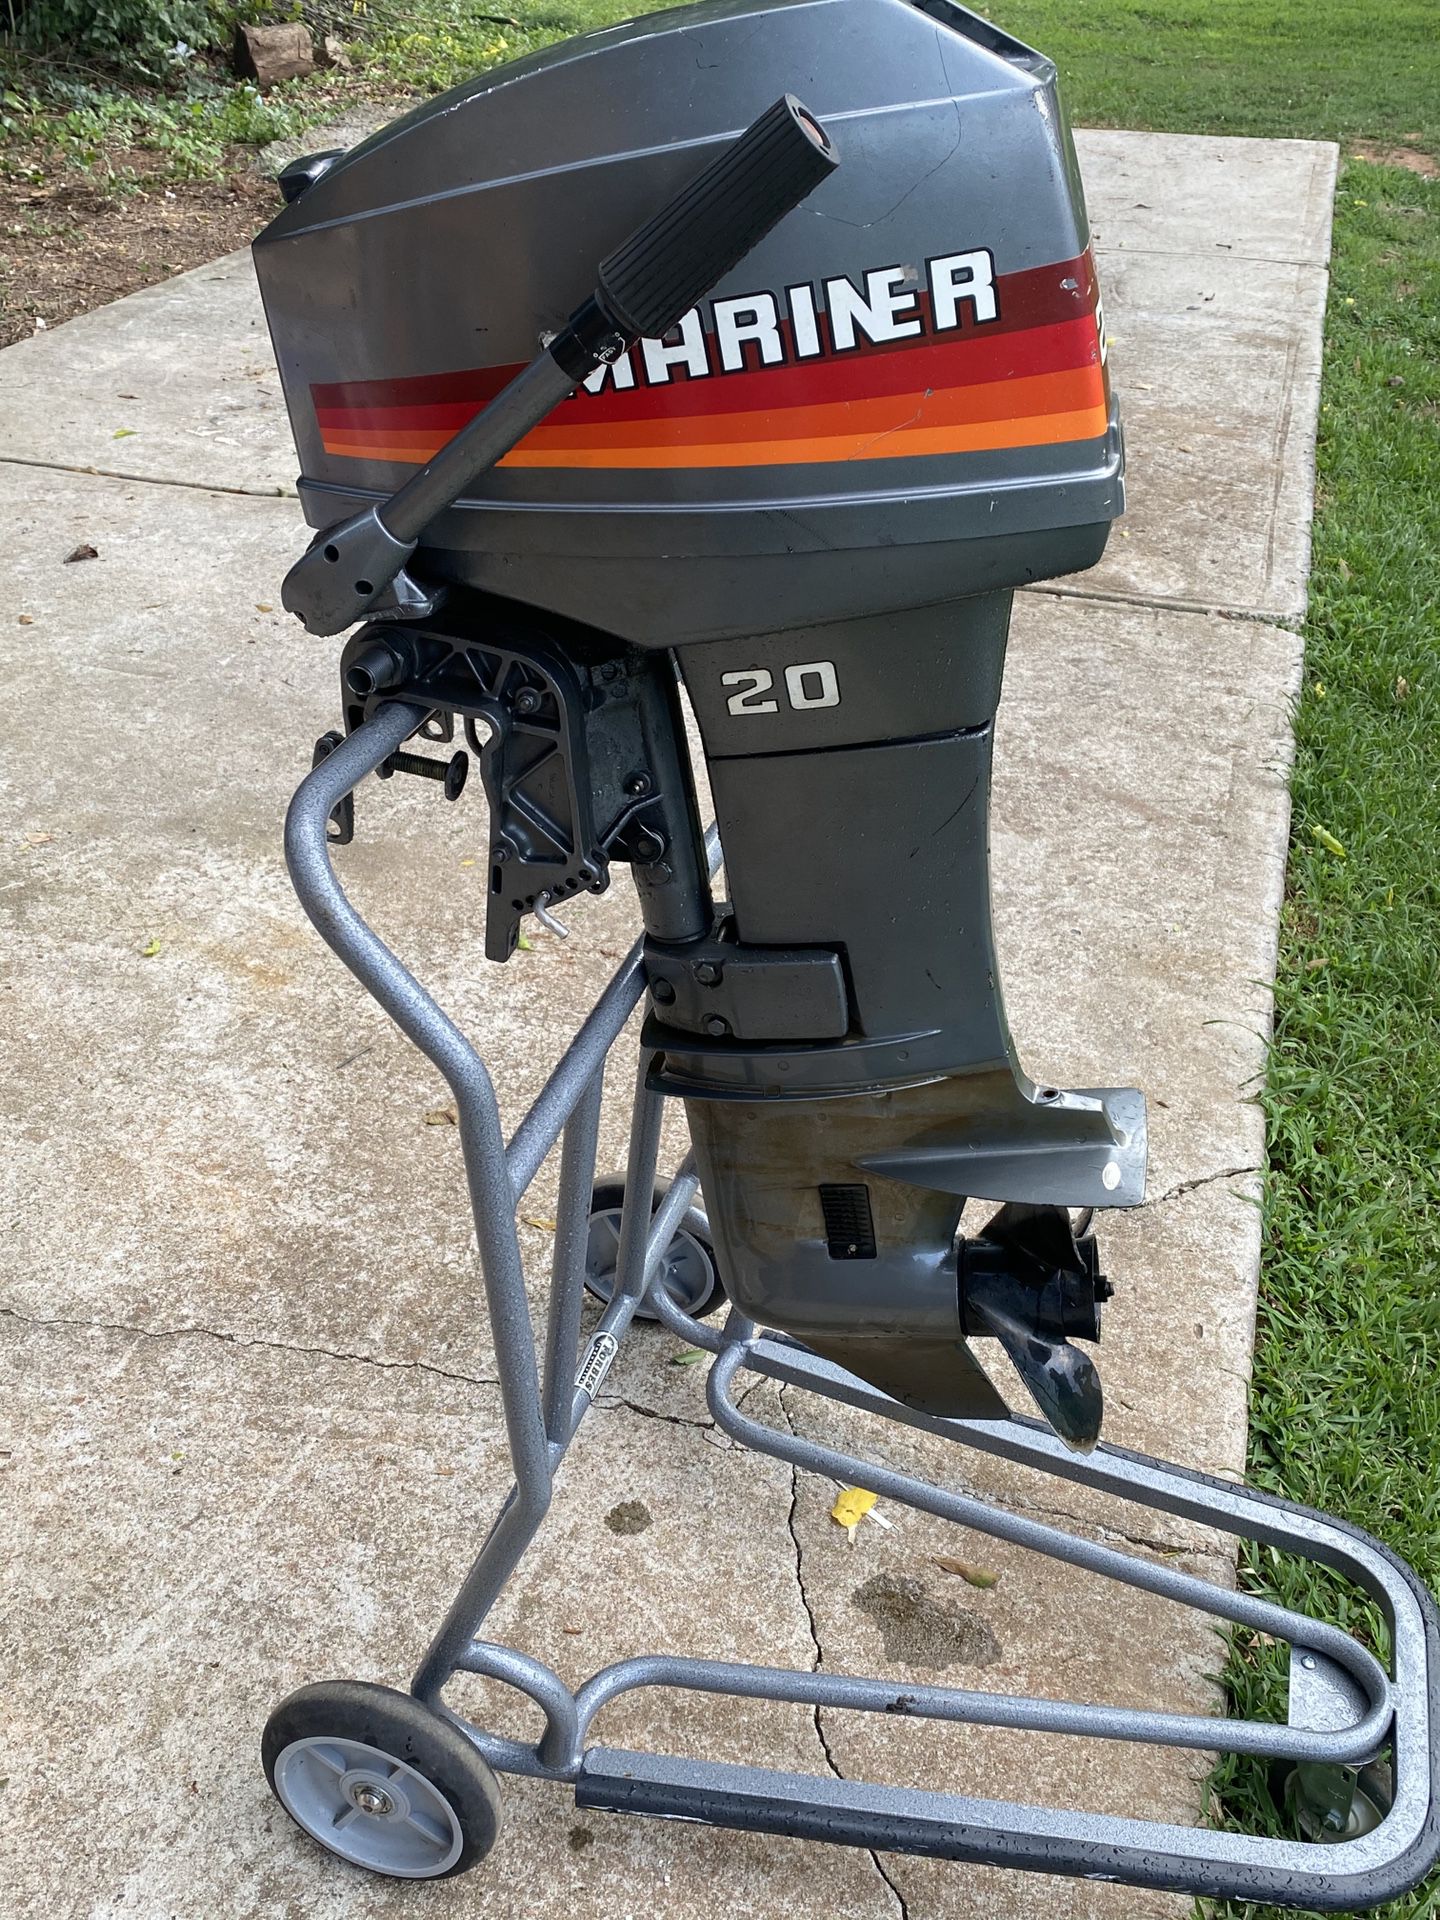 Mariner 20hp gas motor. Can be used for a small fishing/John boat. 1200.00 obo